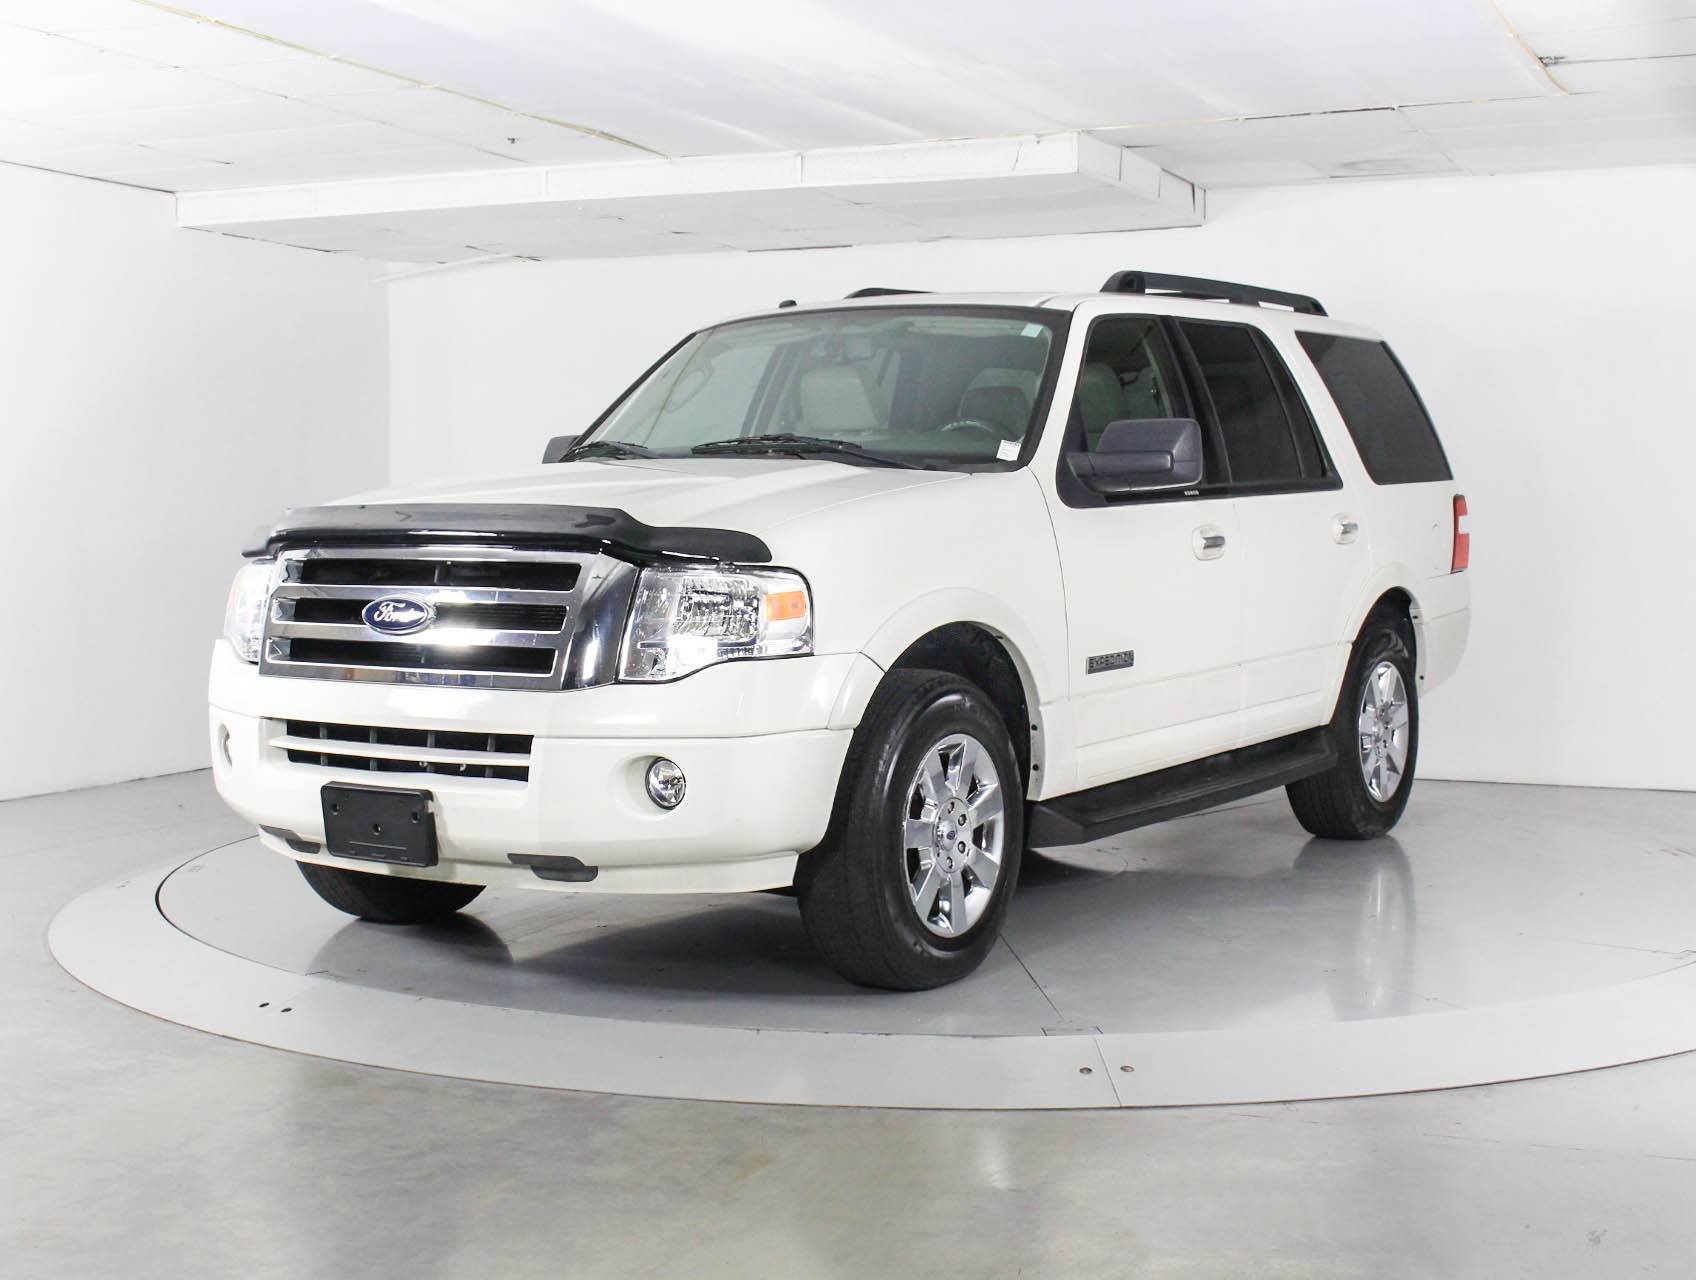 Used 2008 FORD EXPEDITION XLT for sale in undefined | 104358